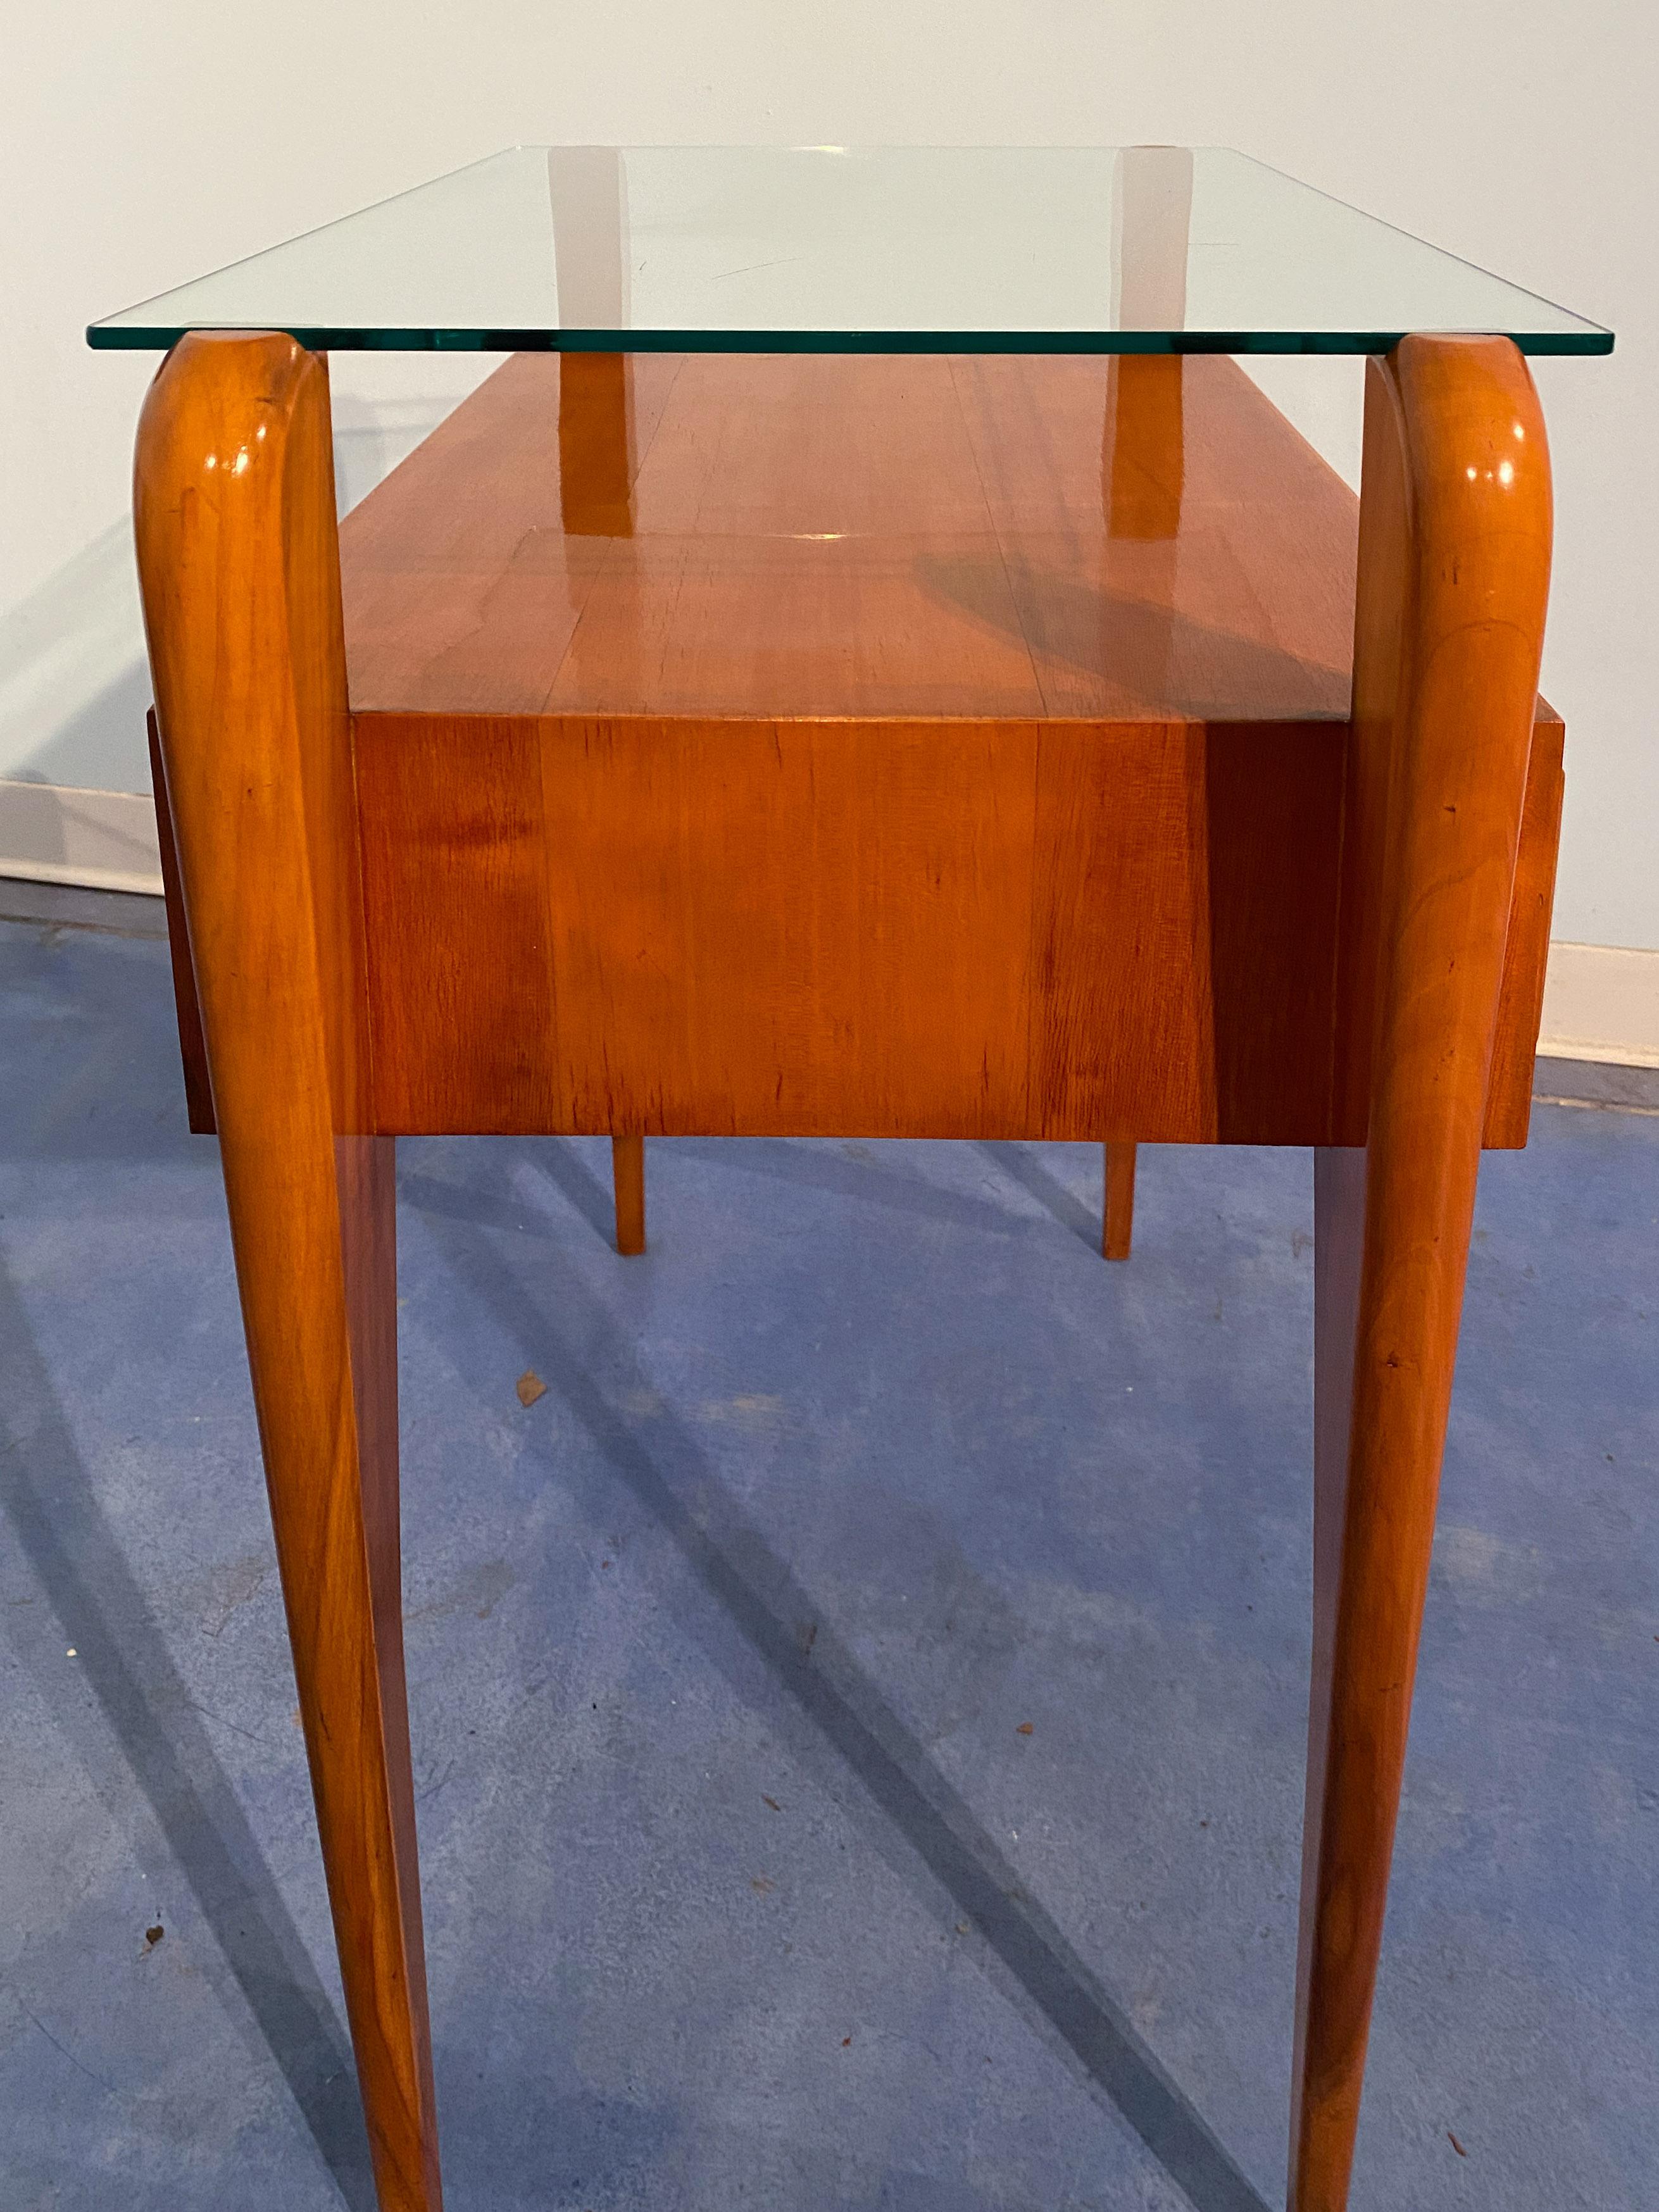 Italian Mid-Century Parchment Bedside or Nightstands by Osvaldo Borsani, 1950 For Sale 3